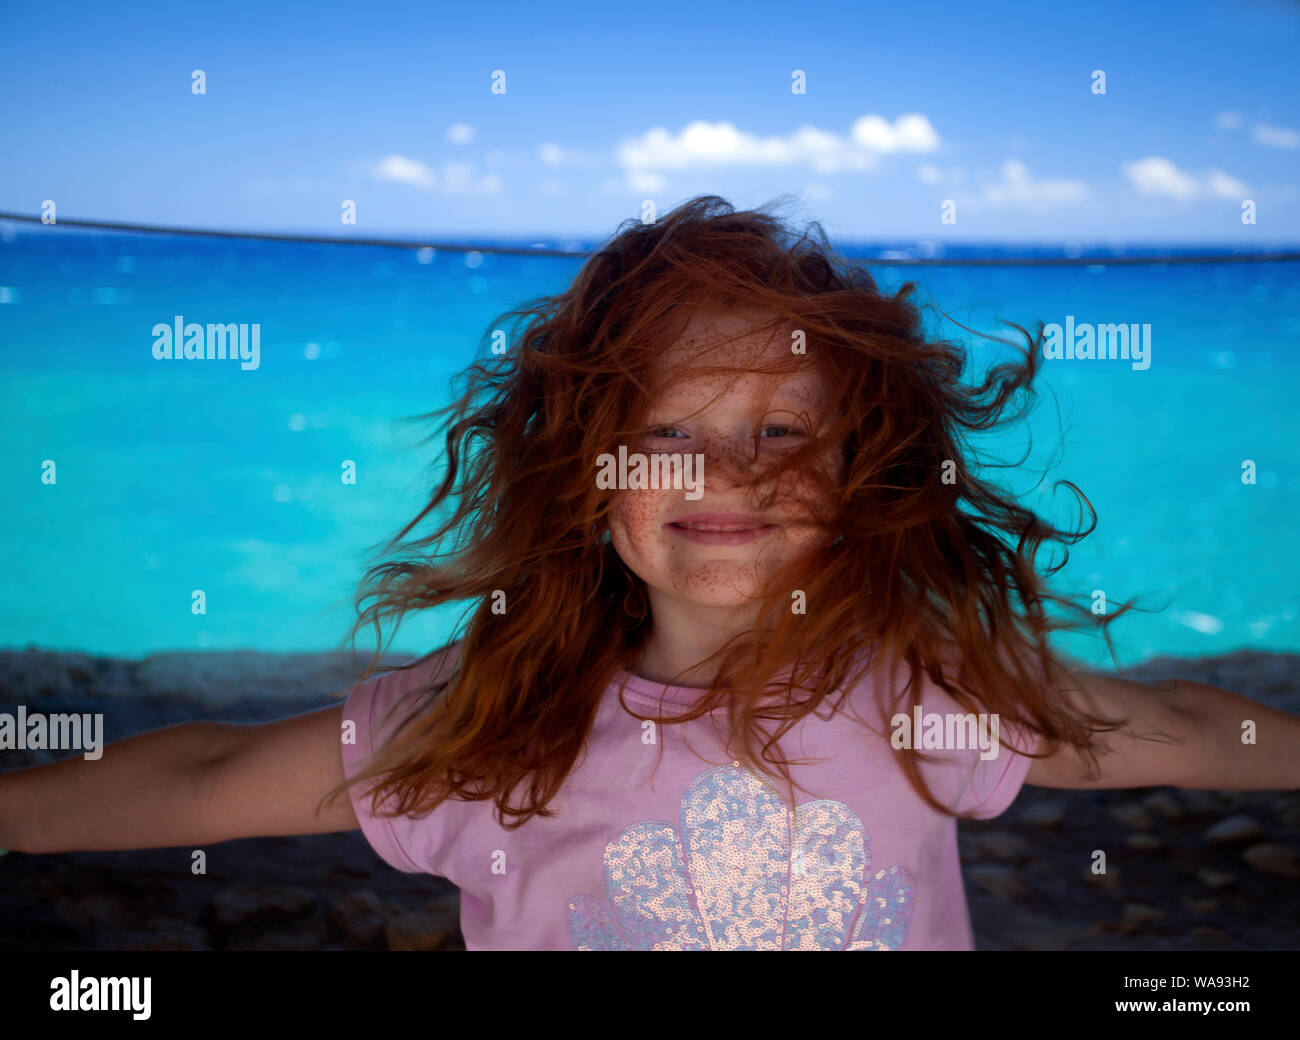 A young red headed girl in Crete with her hair blowing in the wind. Stock Photo